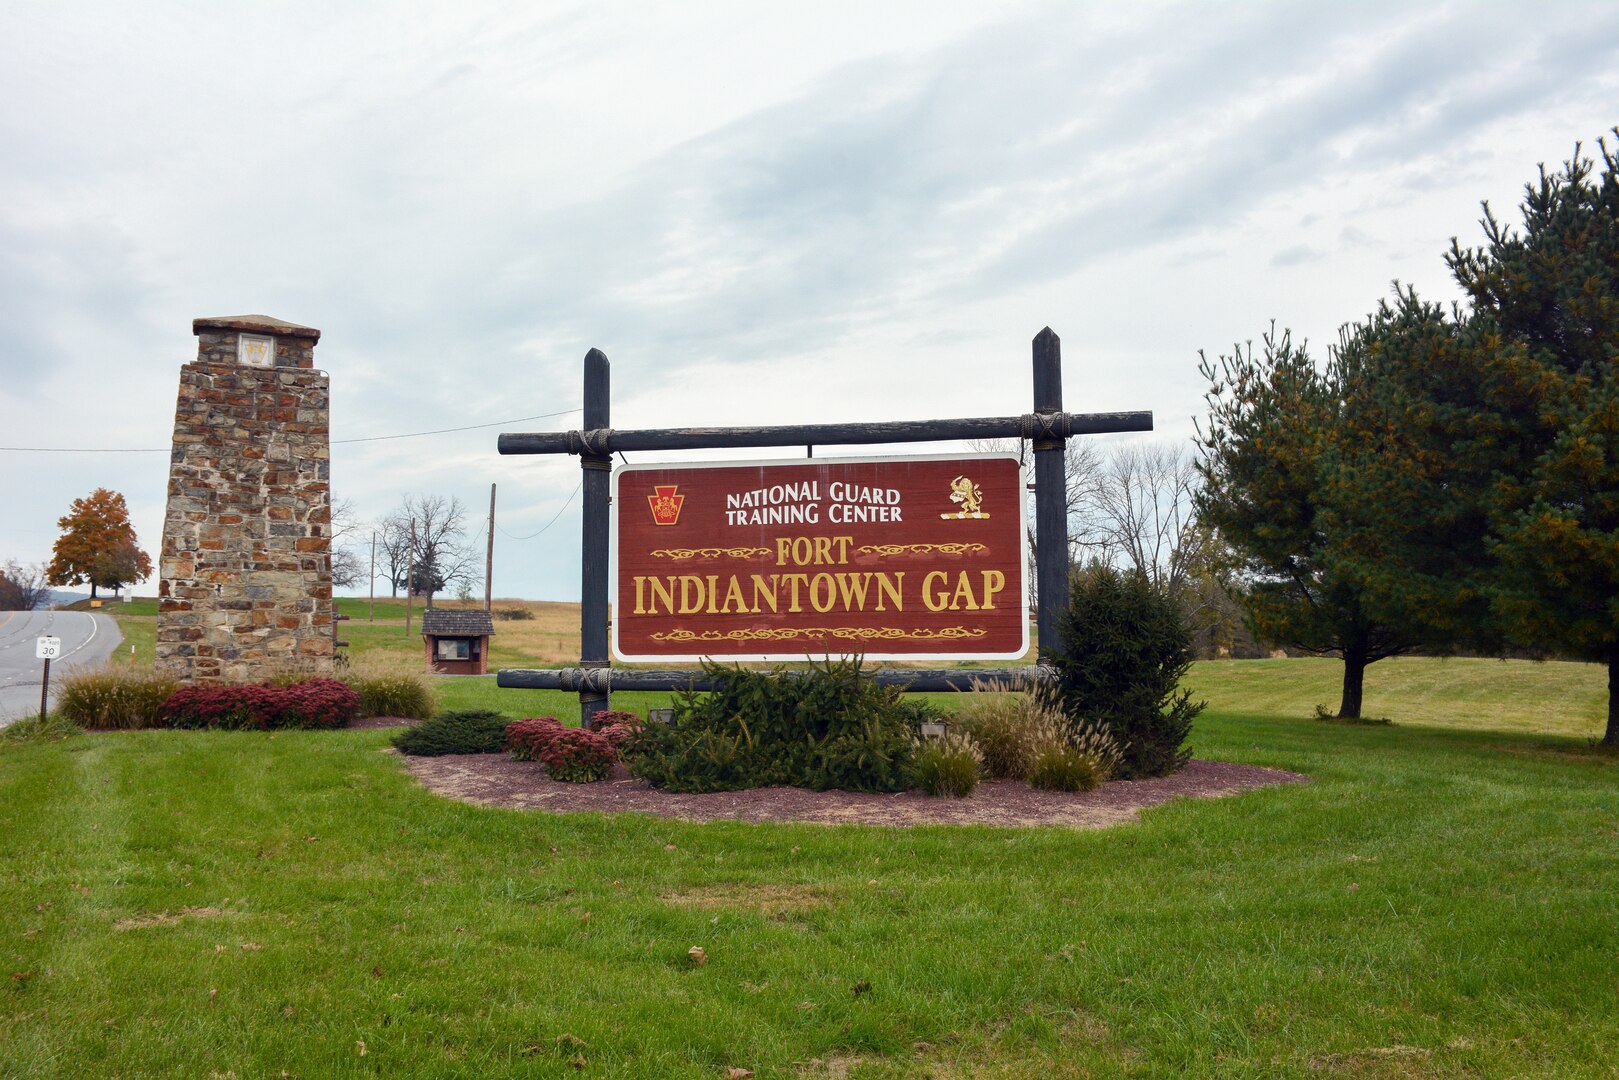 A Fort Indiantown Gap Training Center sign located at the southwest entrance to the post along Fisher Avenue welcomes visitors to the installation. Oct. 31, 2018.